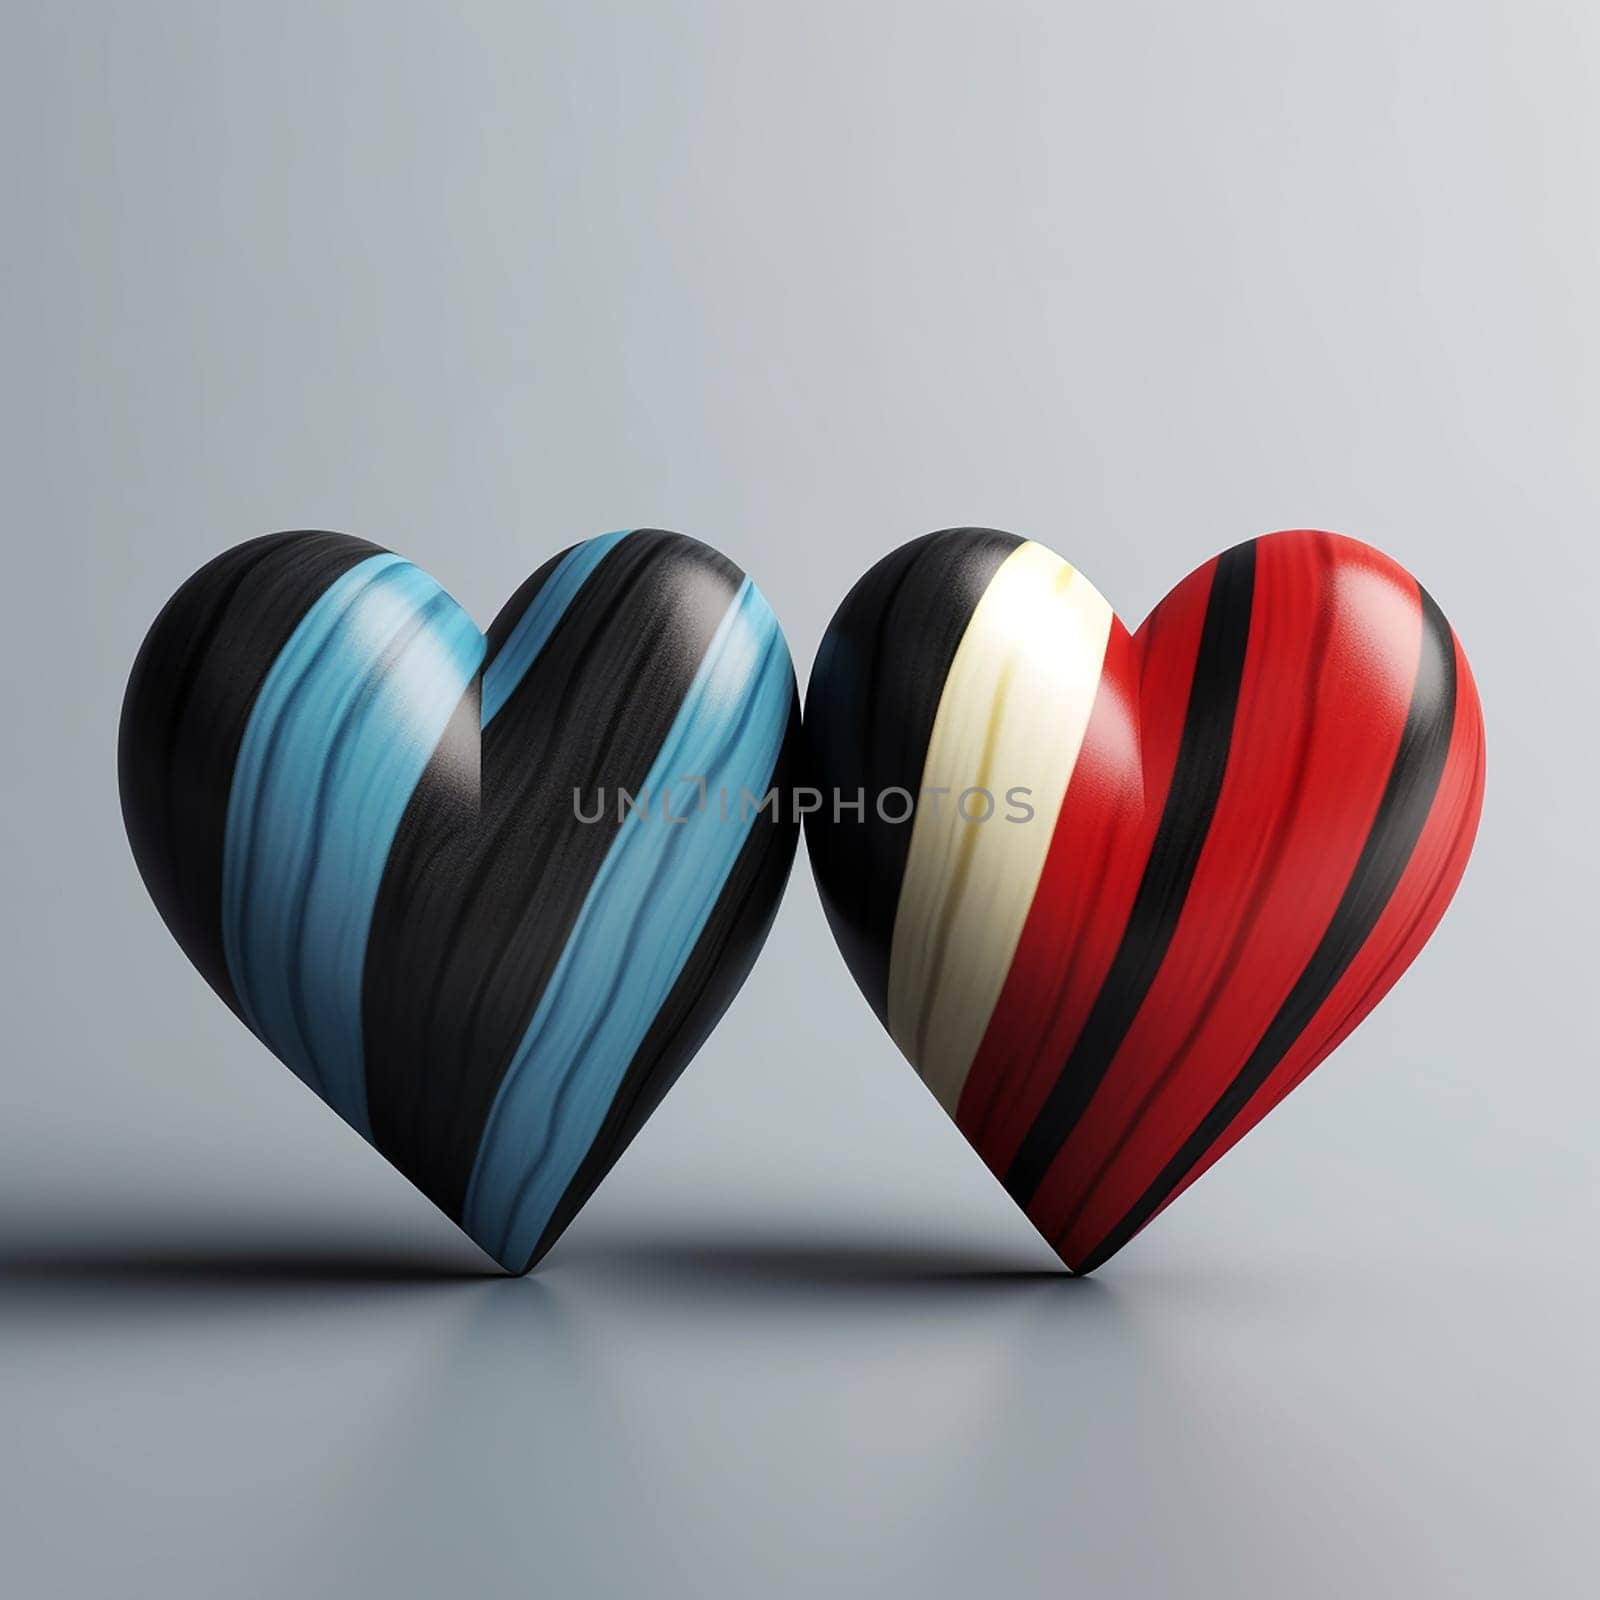 Two heart-shaped objects with contrasting striped patterns.